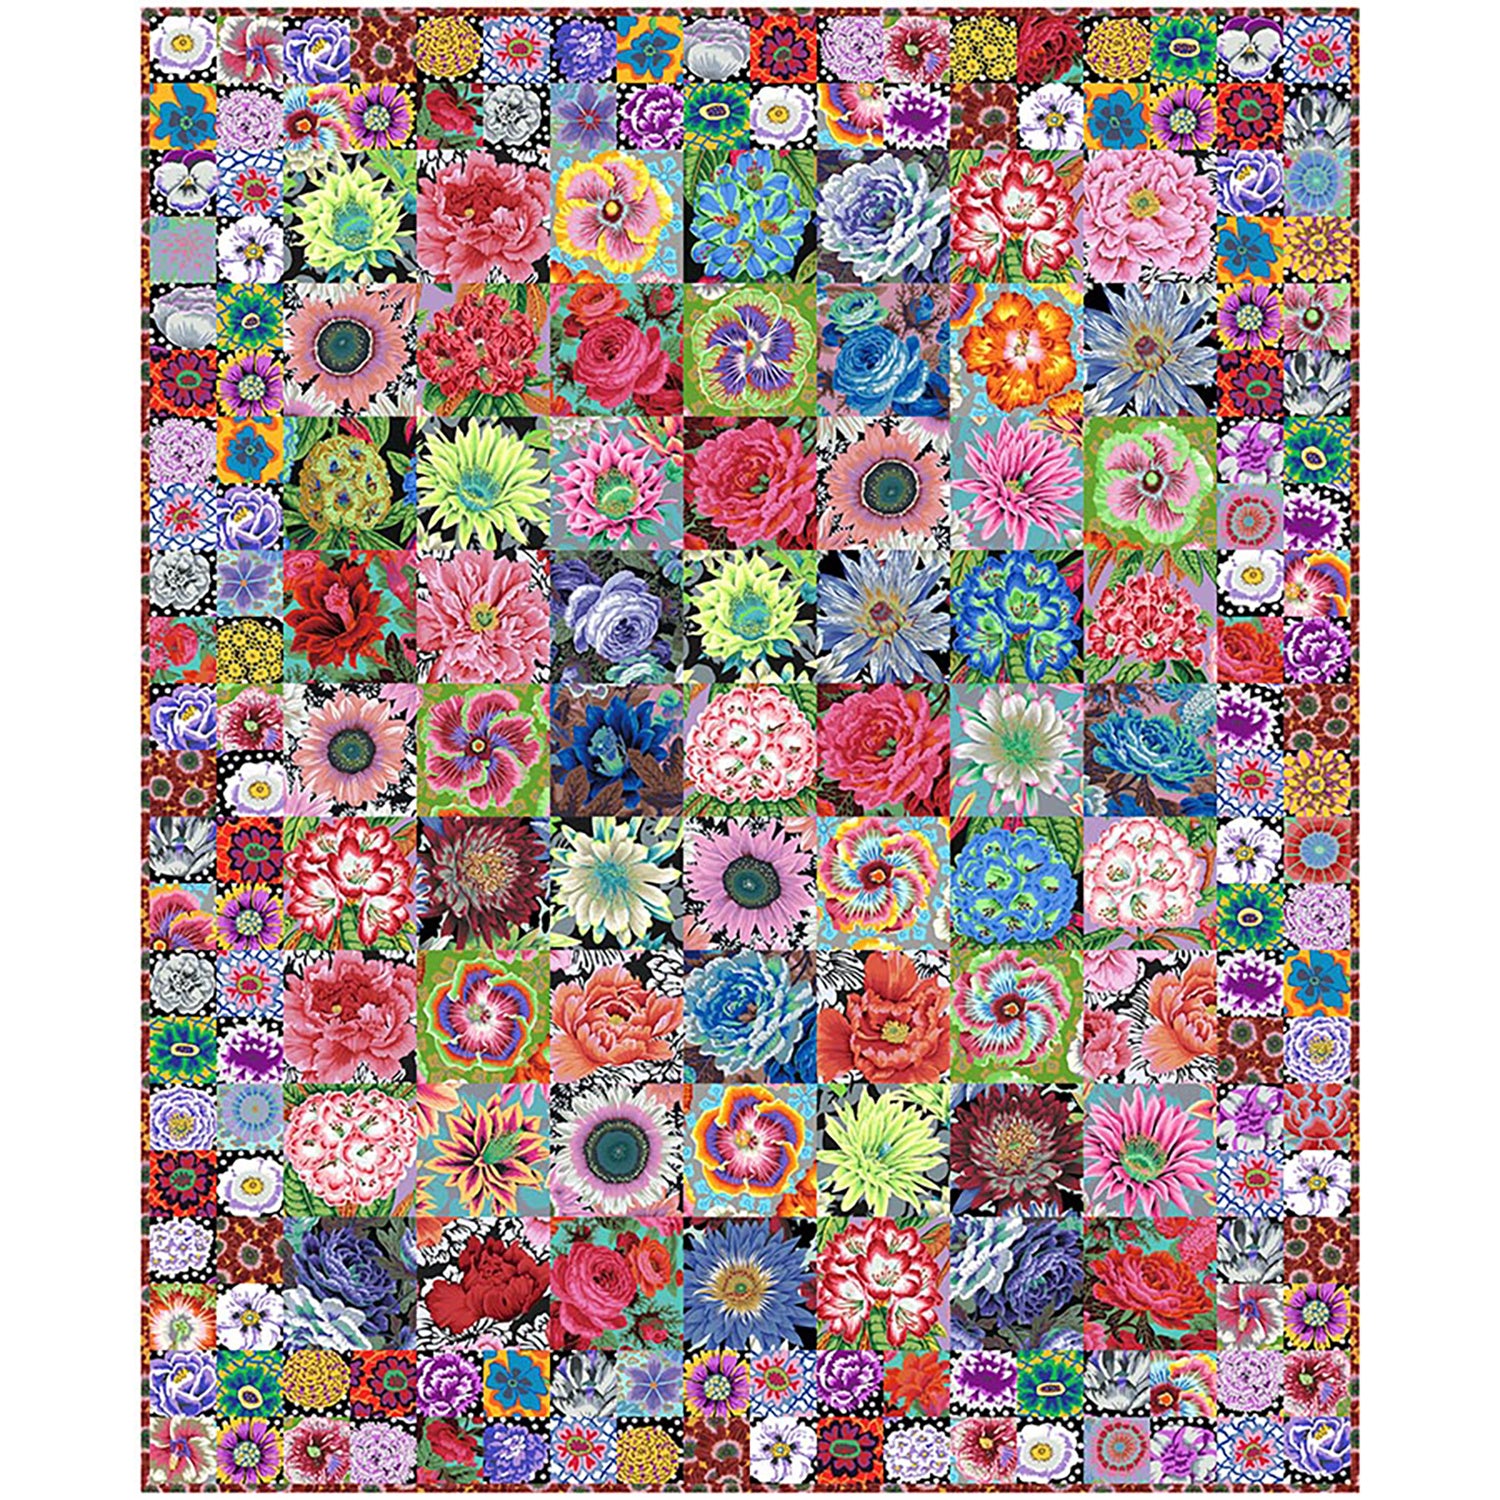 Tula Pink Star Cluster Quilt Kit